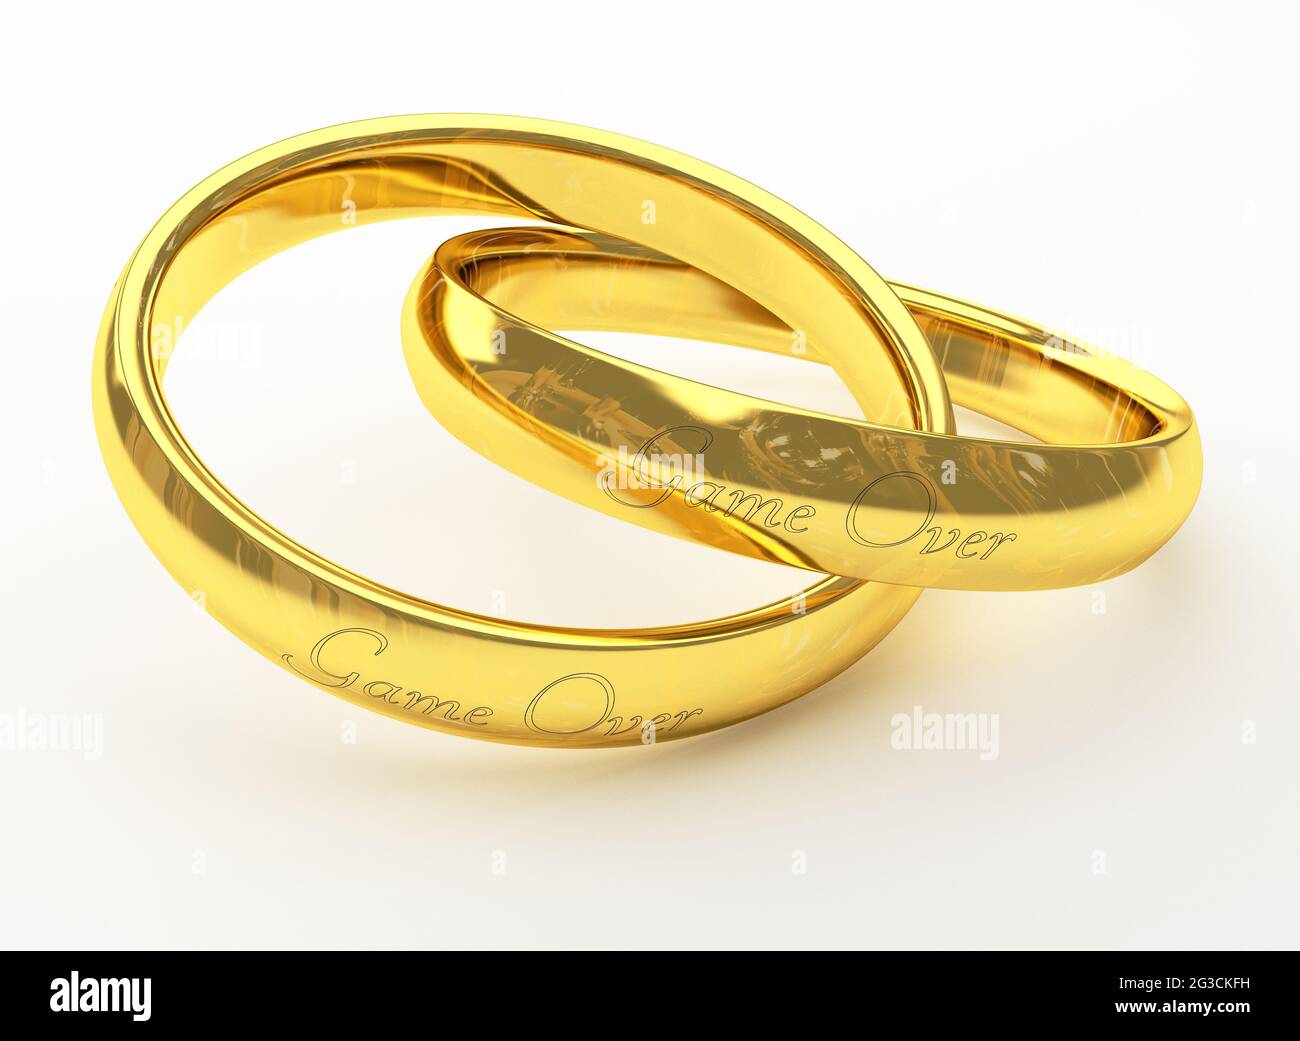 2k+ Rings - Gold & Diamond Ring Designs for Men & Women - Candere by Kalyan  Jewellers